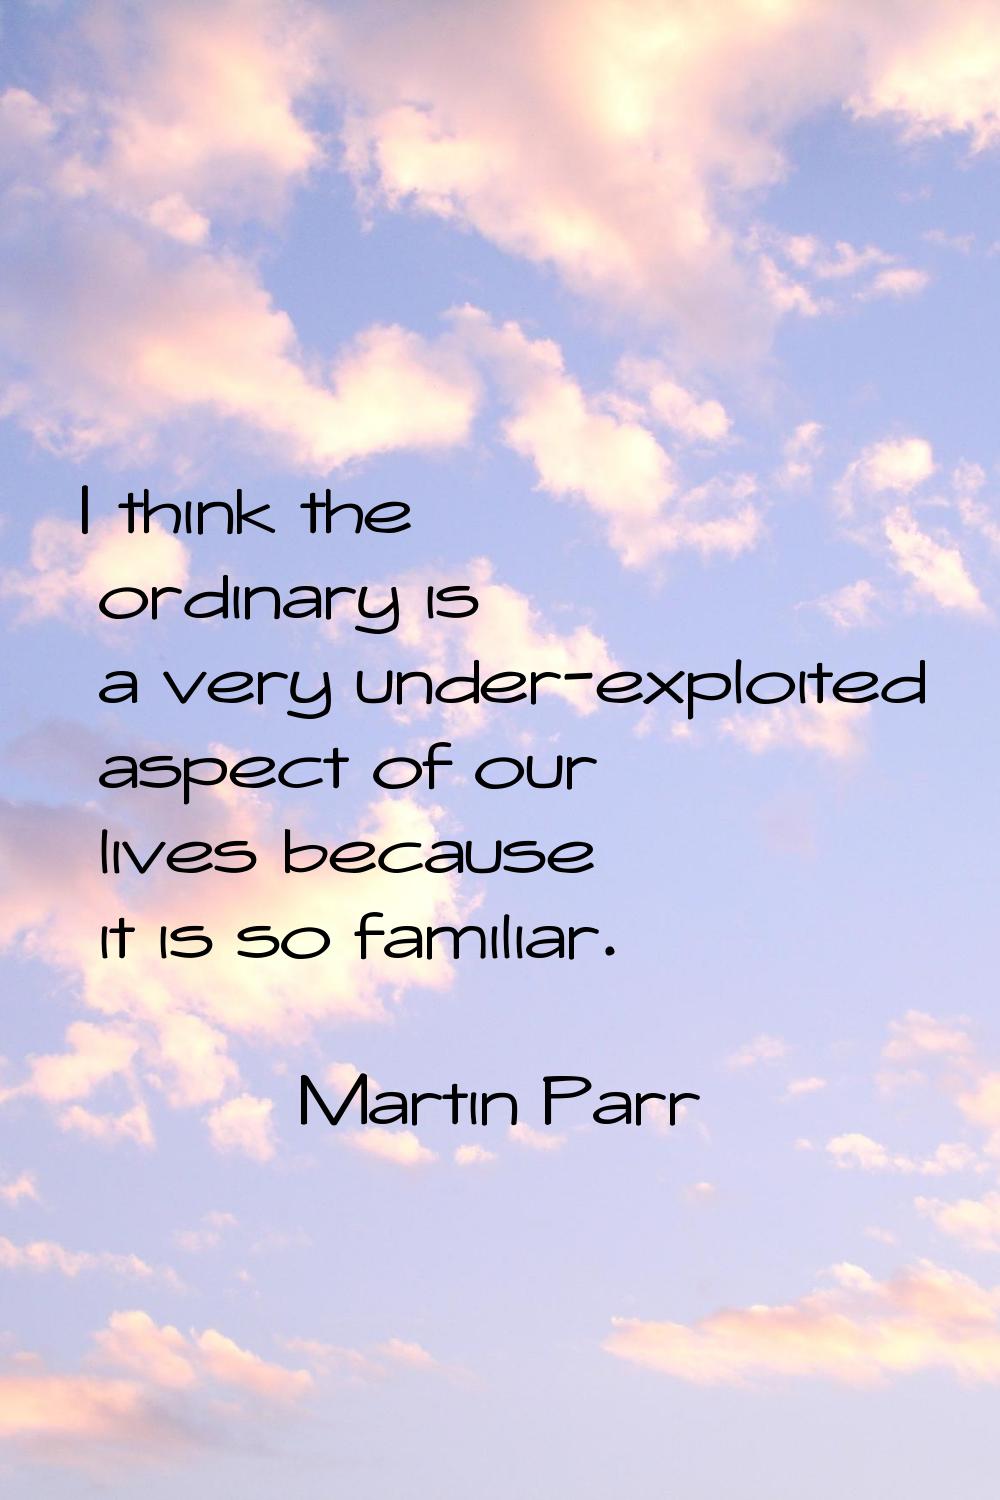 I think the ordinary is a very under-exploited aspect of our lives because it is so familiar.